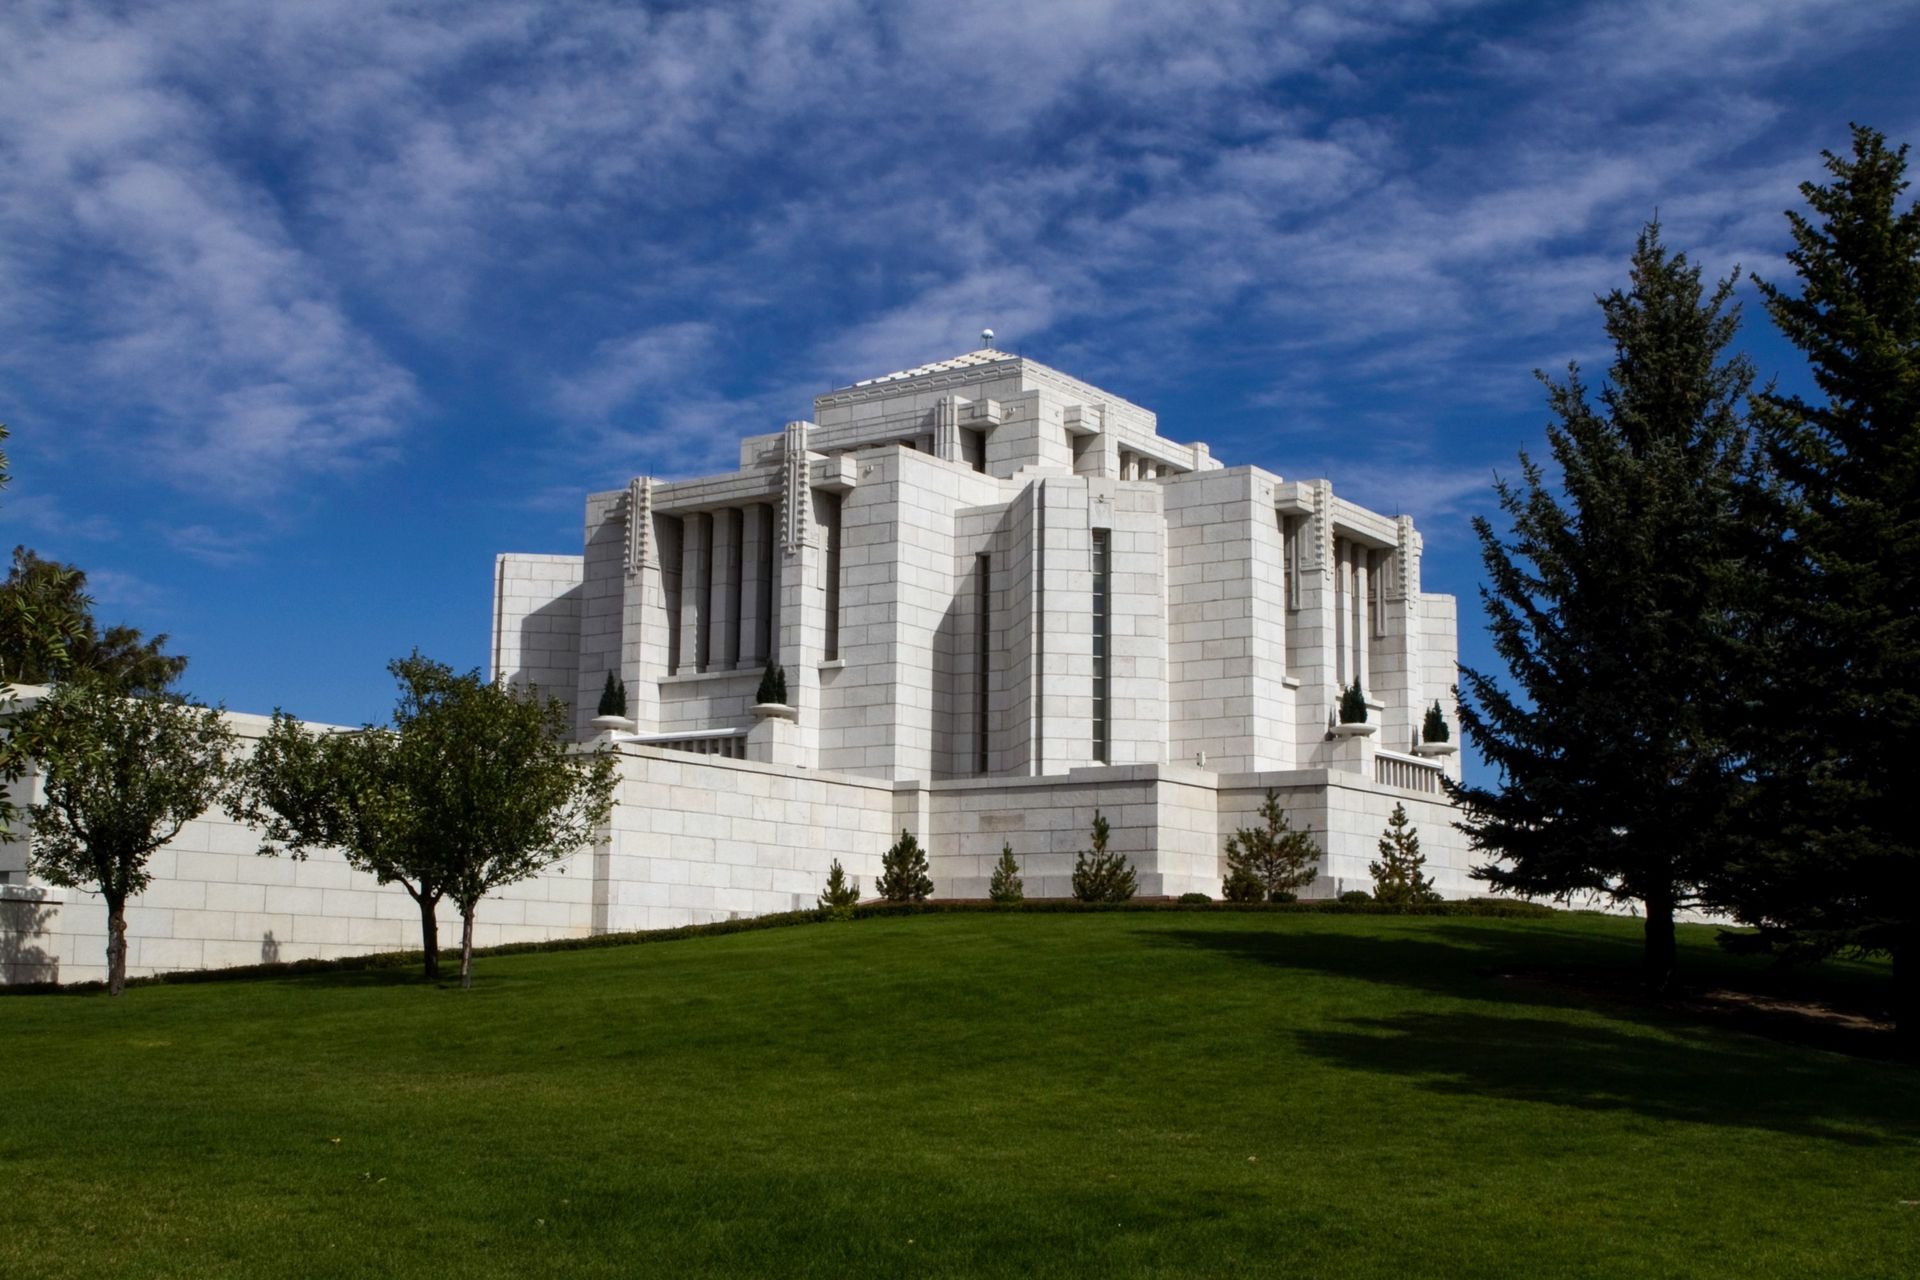 A side view of the Cardston Alberta Temple, including scenery.